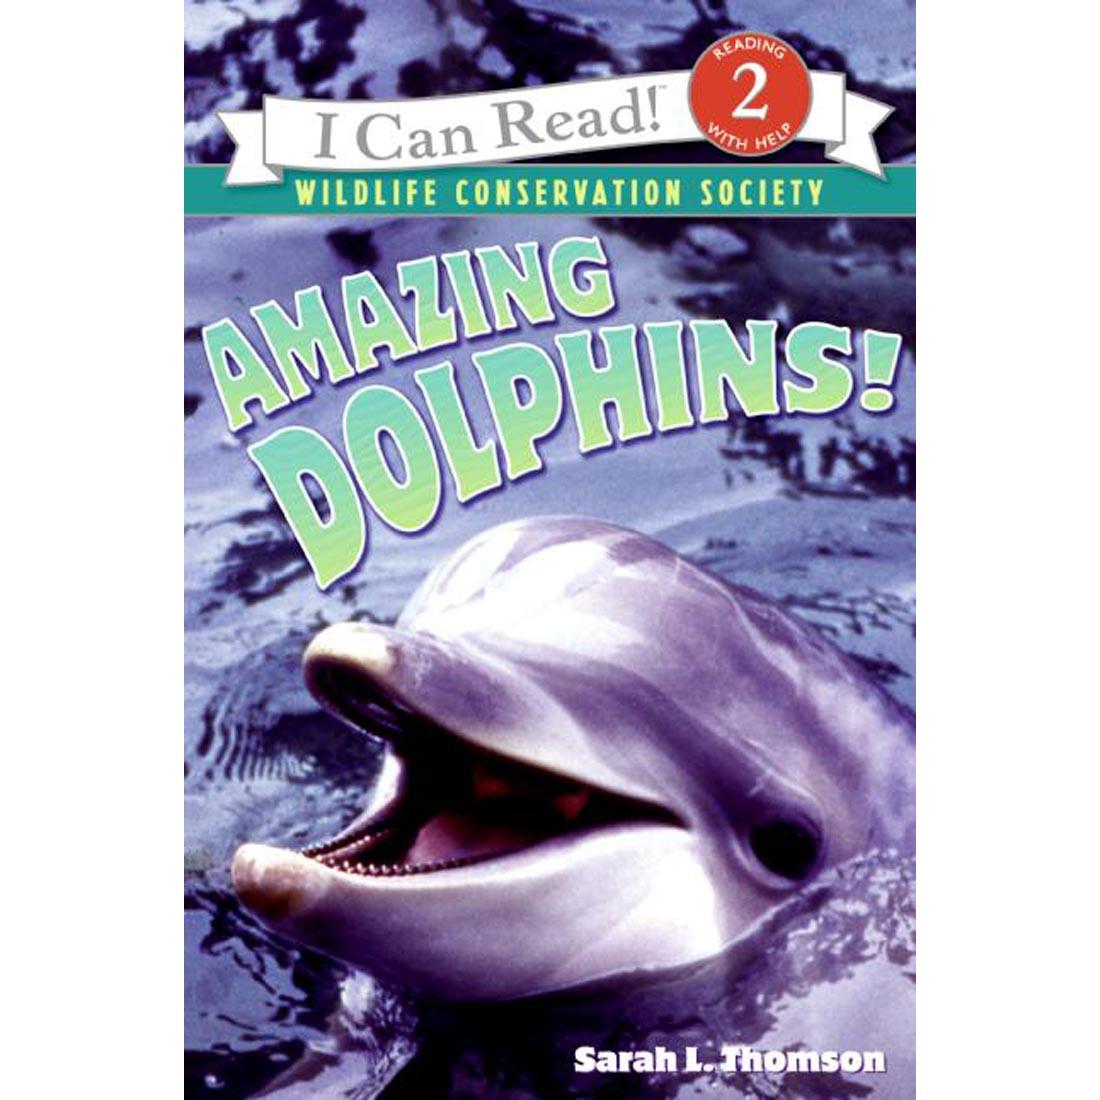 Amazing Dolphins! - An I Can Read Book, Level 2 from the Wildlife Conservation Society